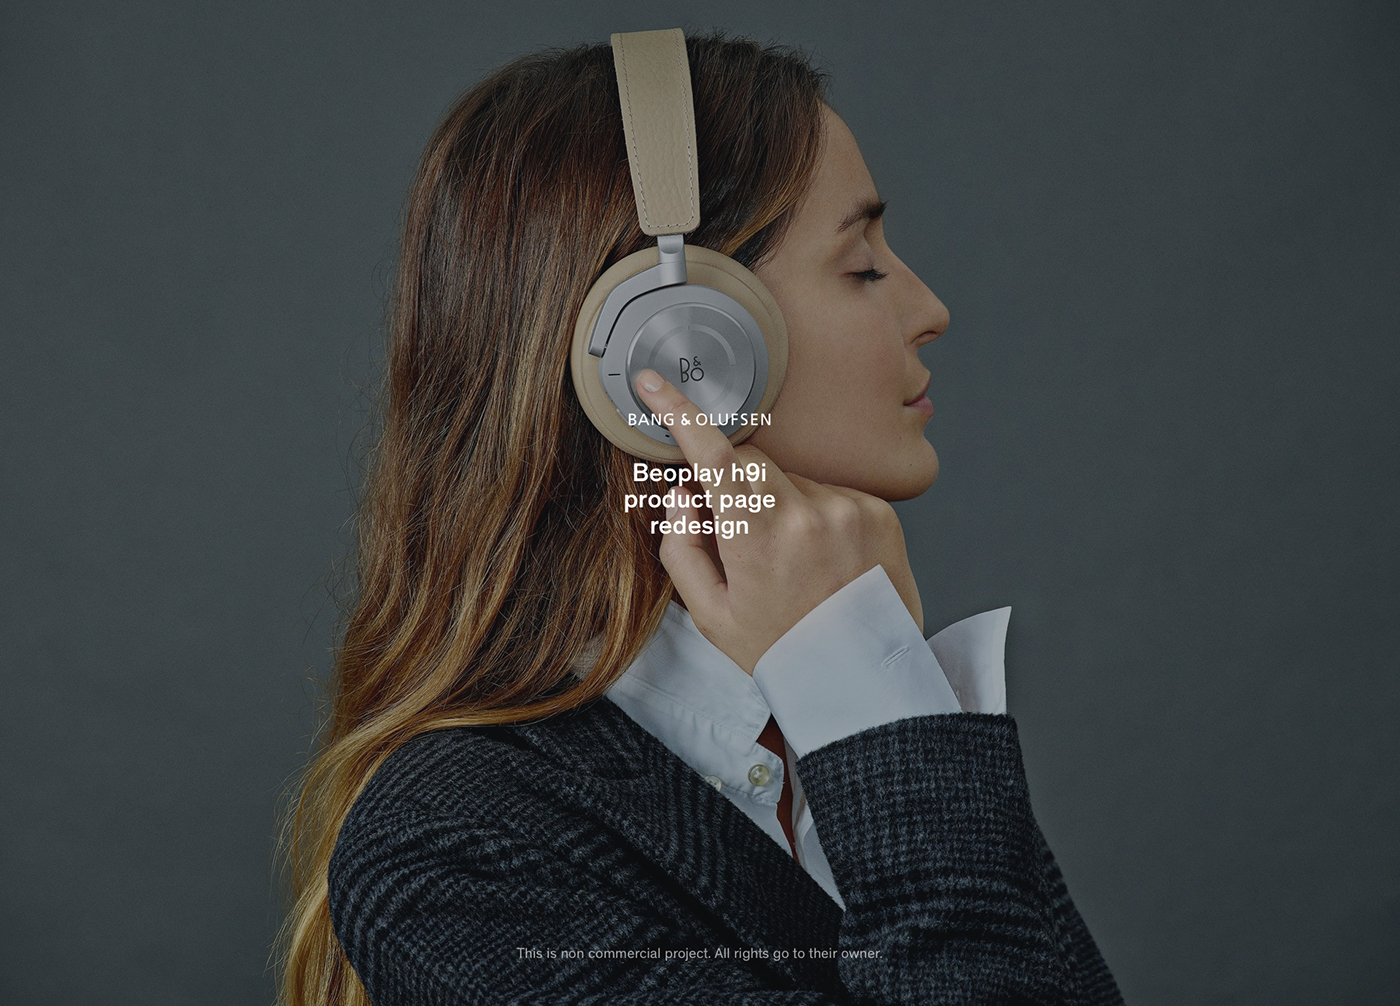 Product Page screen design idea #264: Bang & Olufsen Beoplay